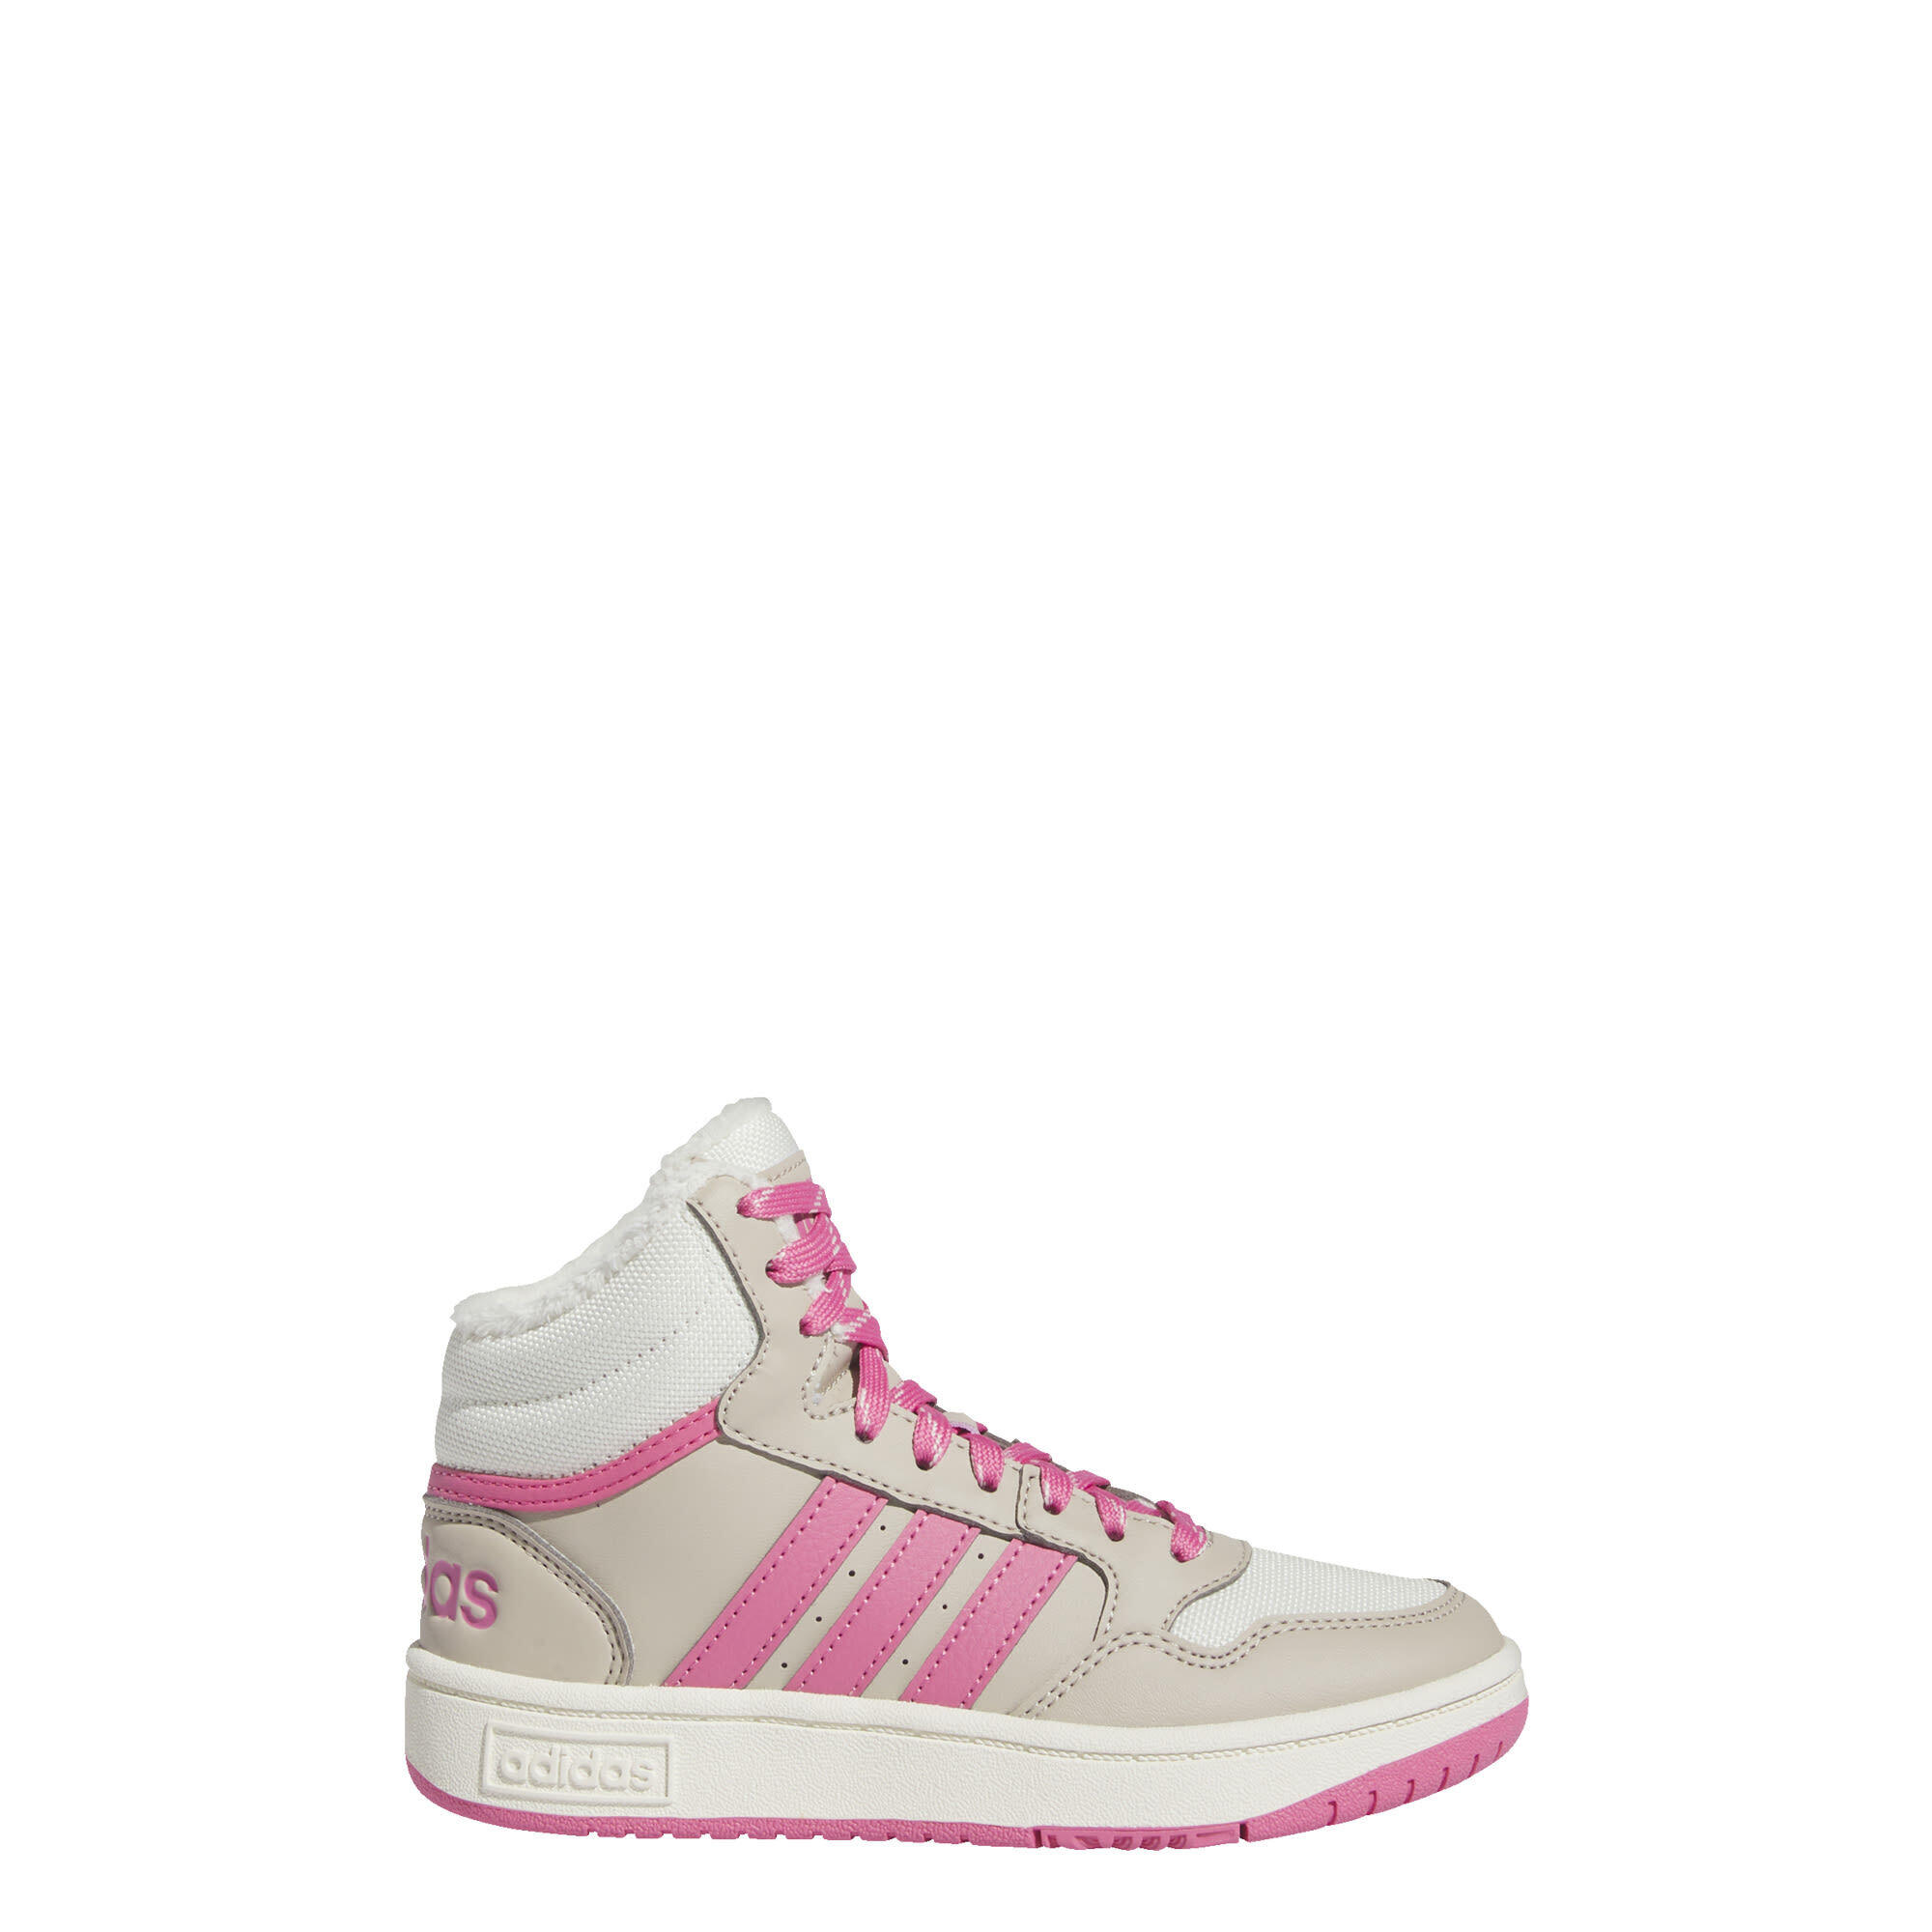 ADIDAS Hoops Mid 3.0 Shoes Kids